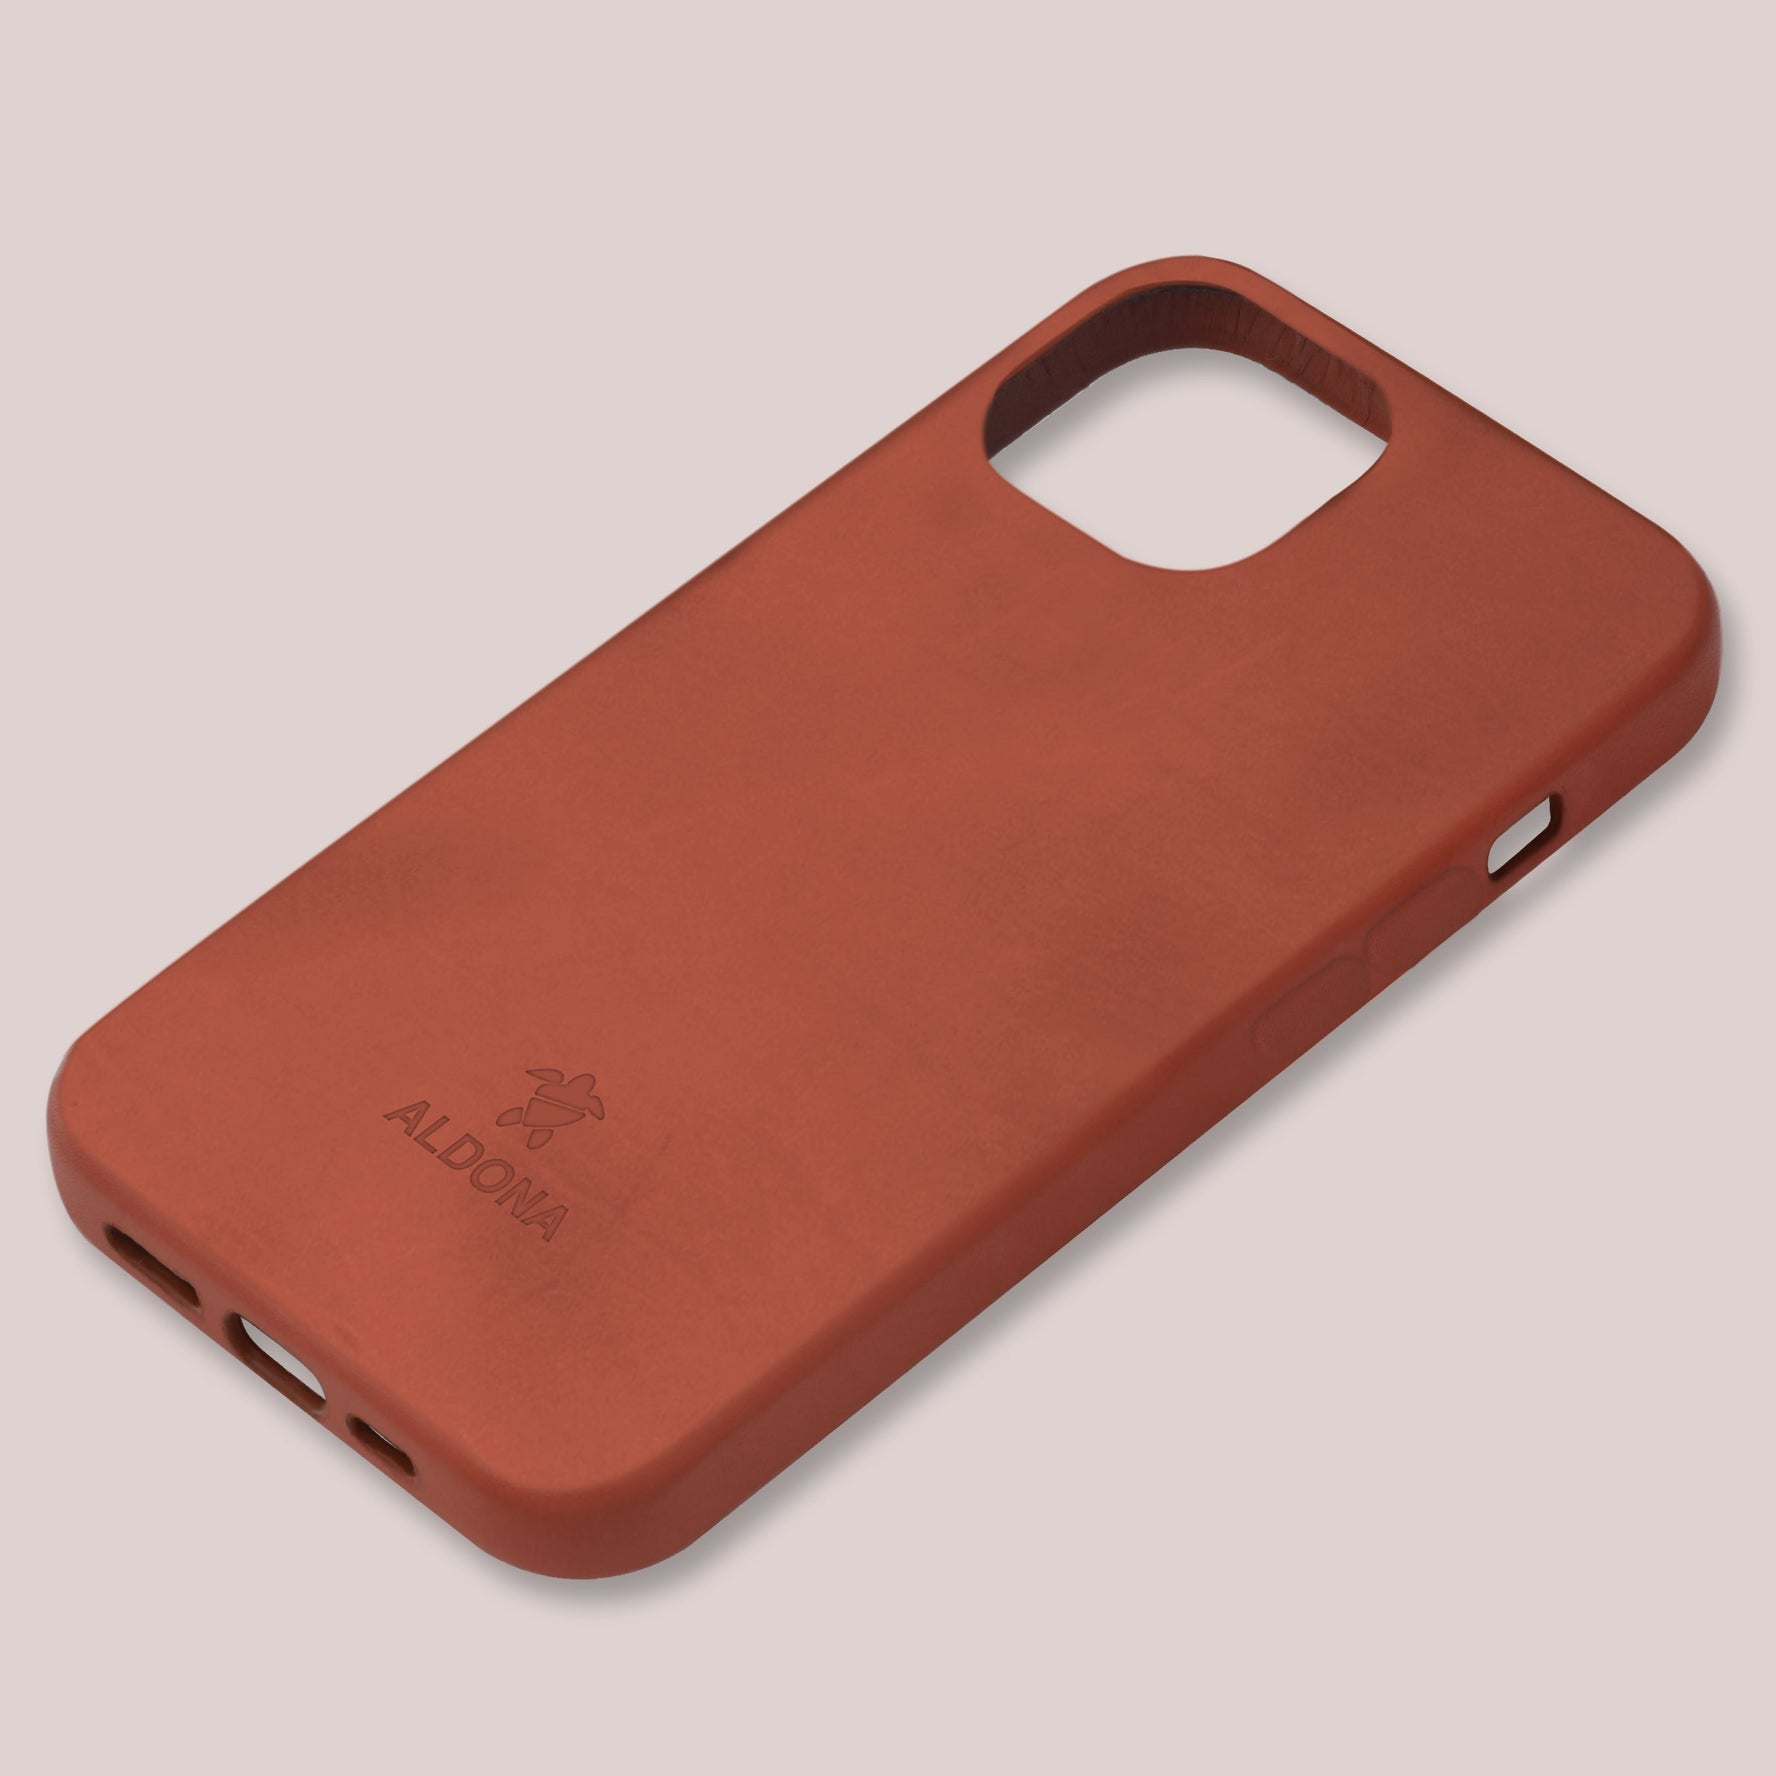 Kalon Case for iPhone 12 Pro Max with MagSafe Compatibility - Cognac